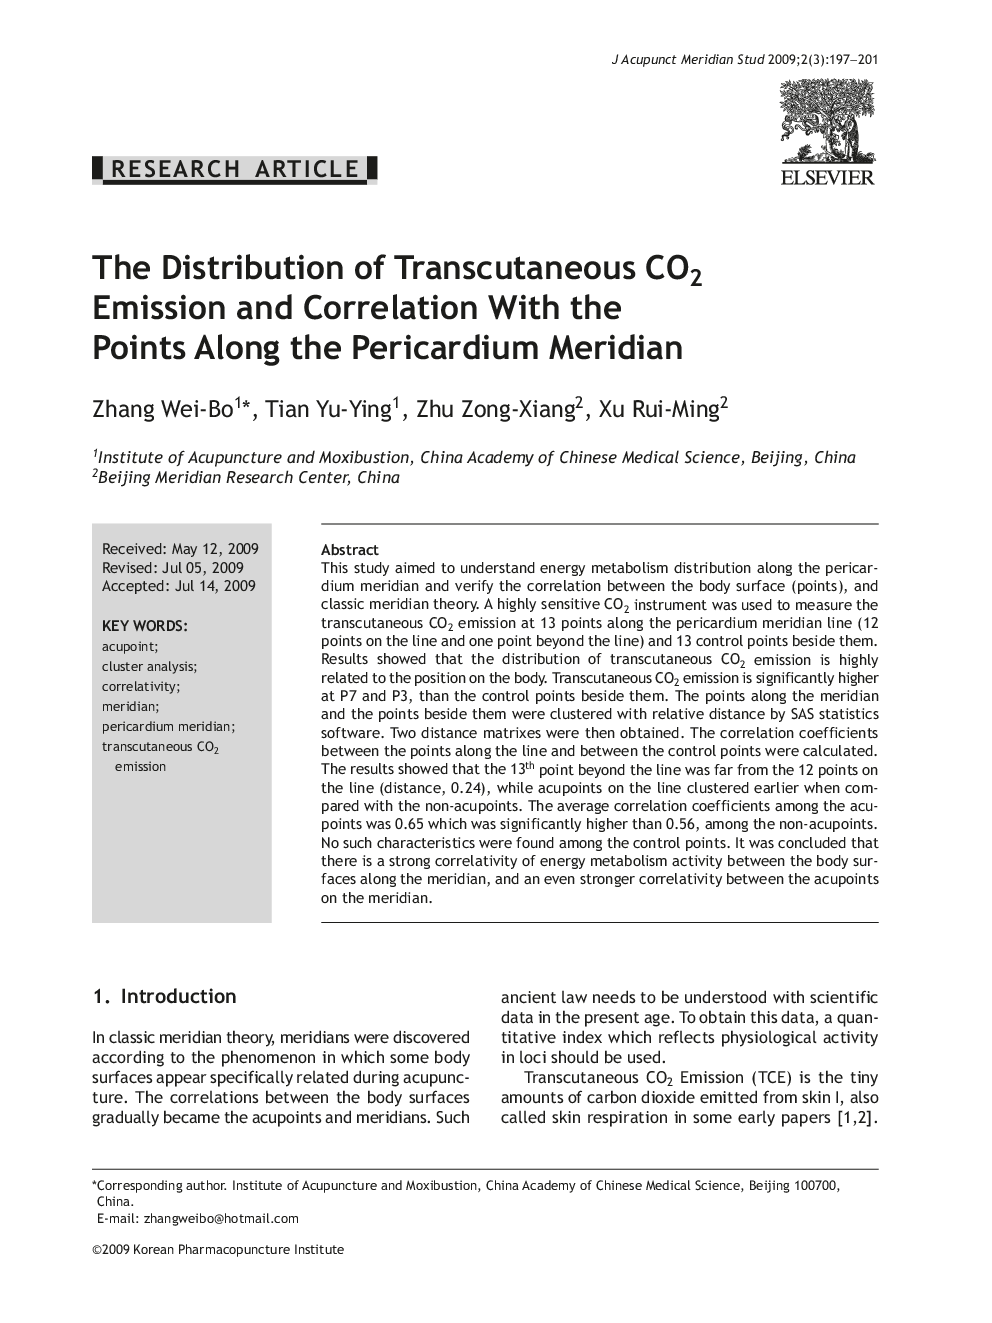 The Distribution of Transcutaneous CO2 Emission and Correlation With the Points Along the Pericardium Meridian